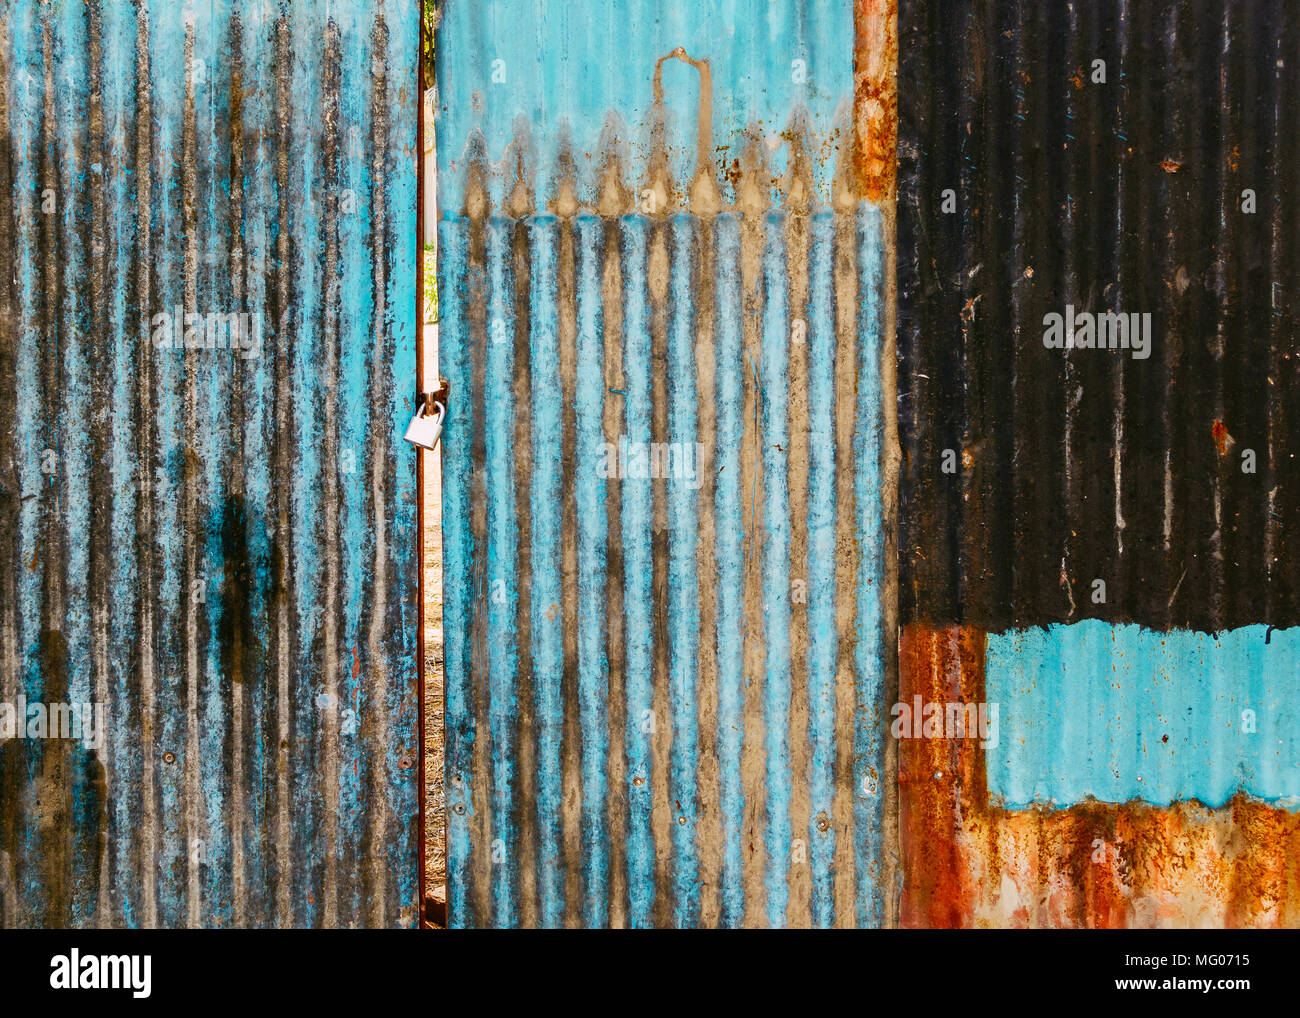 Old rusted corrugated blue gate, grungy texture or background. Gate shut with a lock. Stock Photo